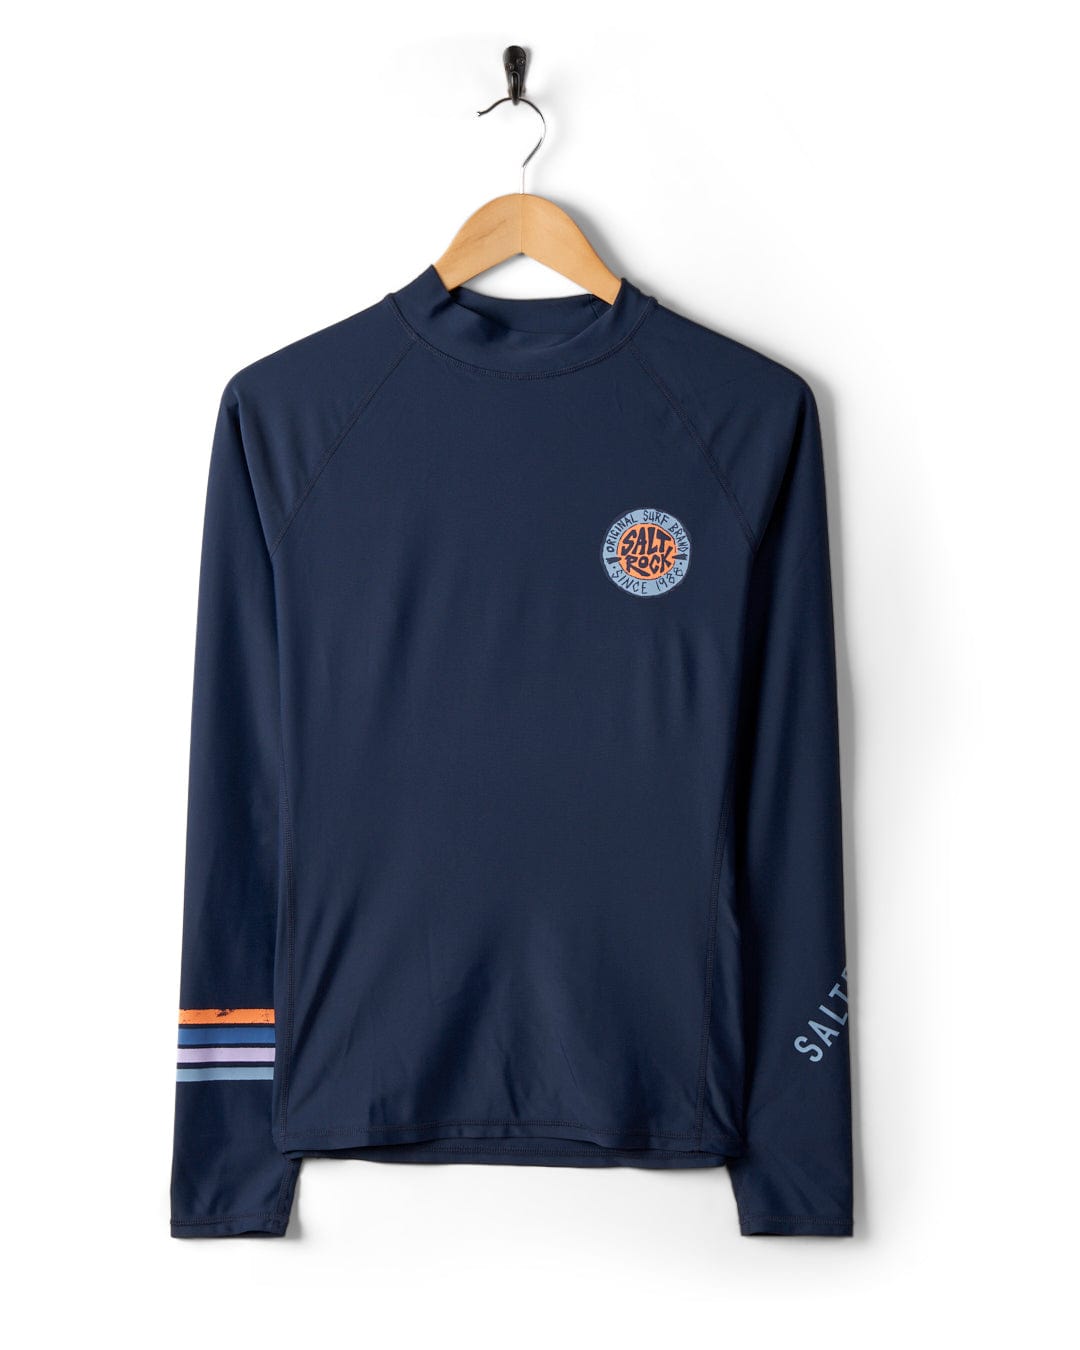 Saltrock Navy Blue Long Sleeve Rashvest with UPF 50 protection, hanging on a hook against a white background, featuring a small logo on the chest and striped cuffs.